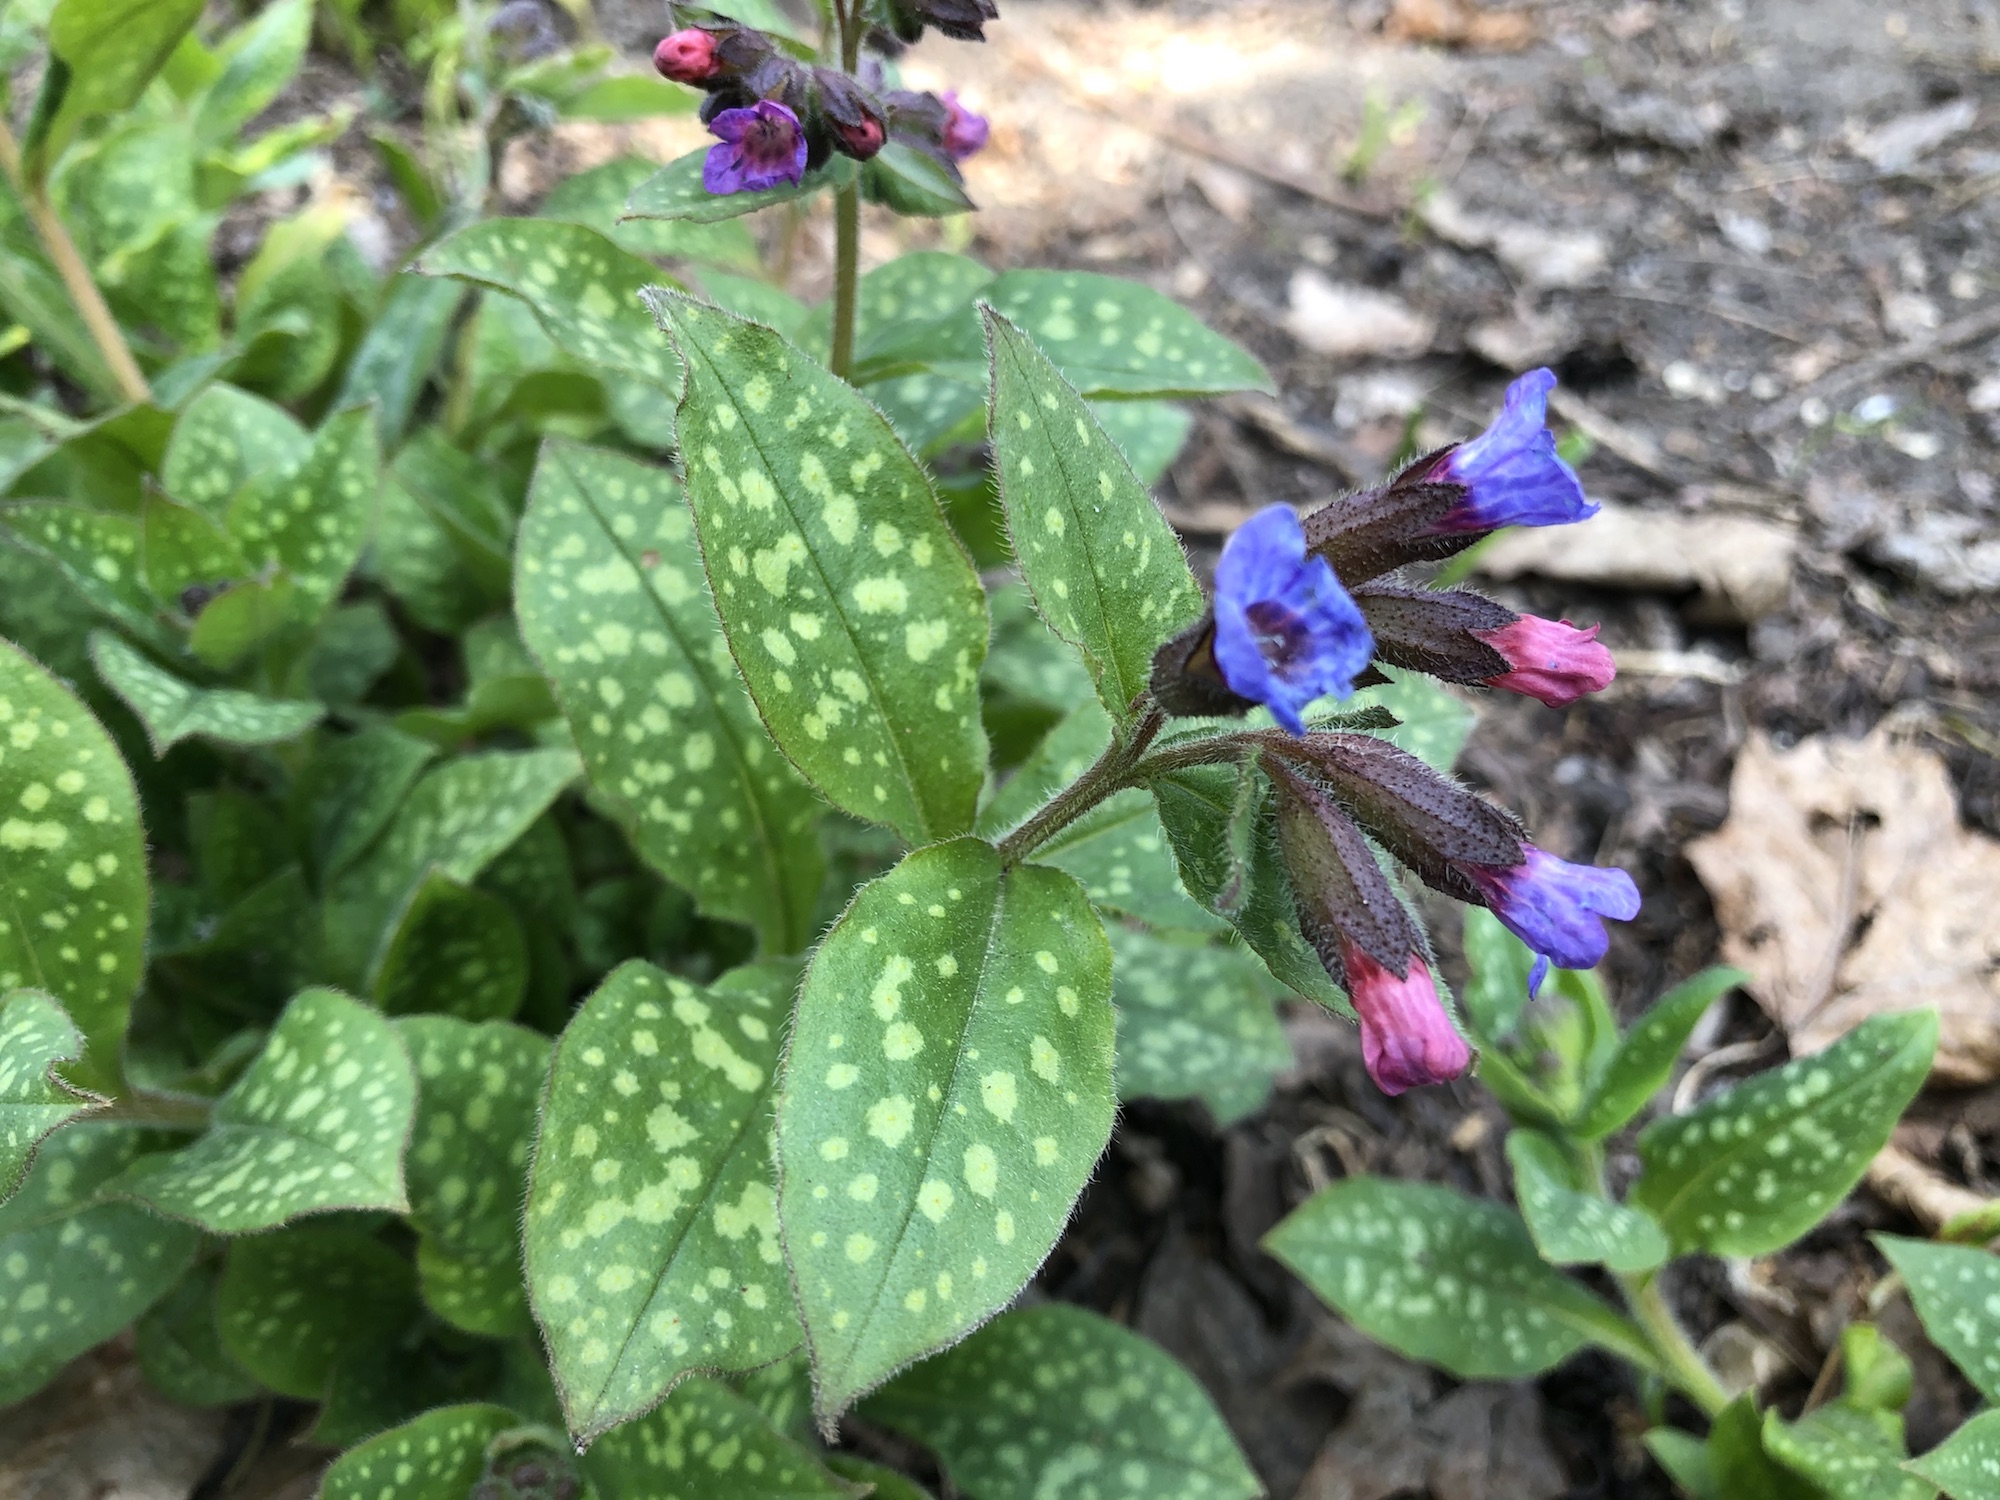 Lungwort near Agawa Path in Nakoma in Madison, Wisconsin on April 22, 2020.